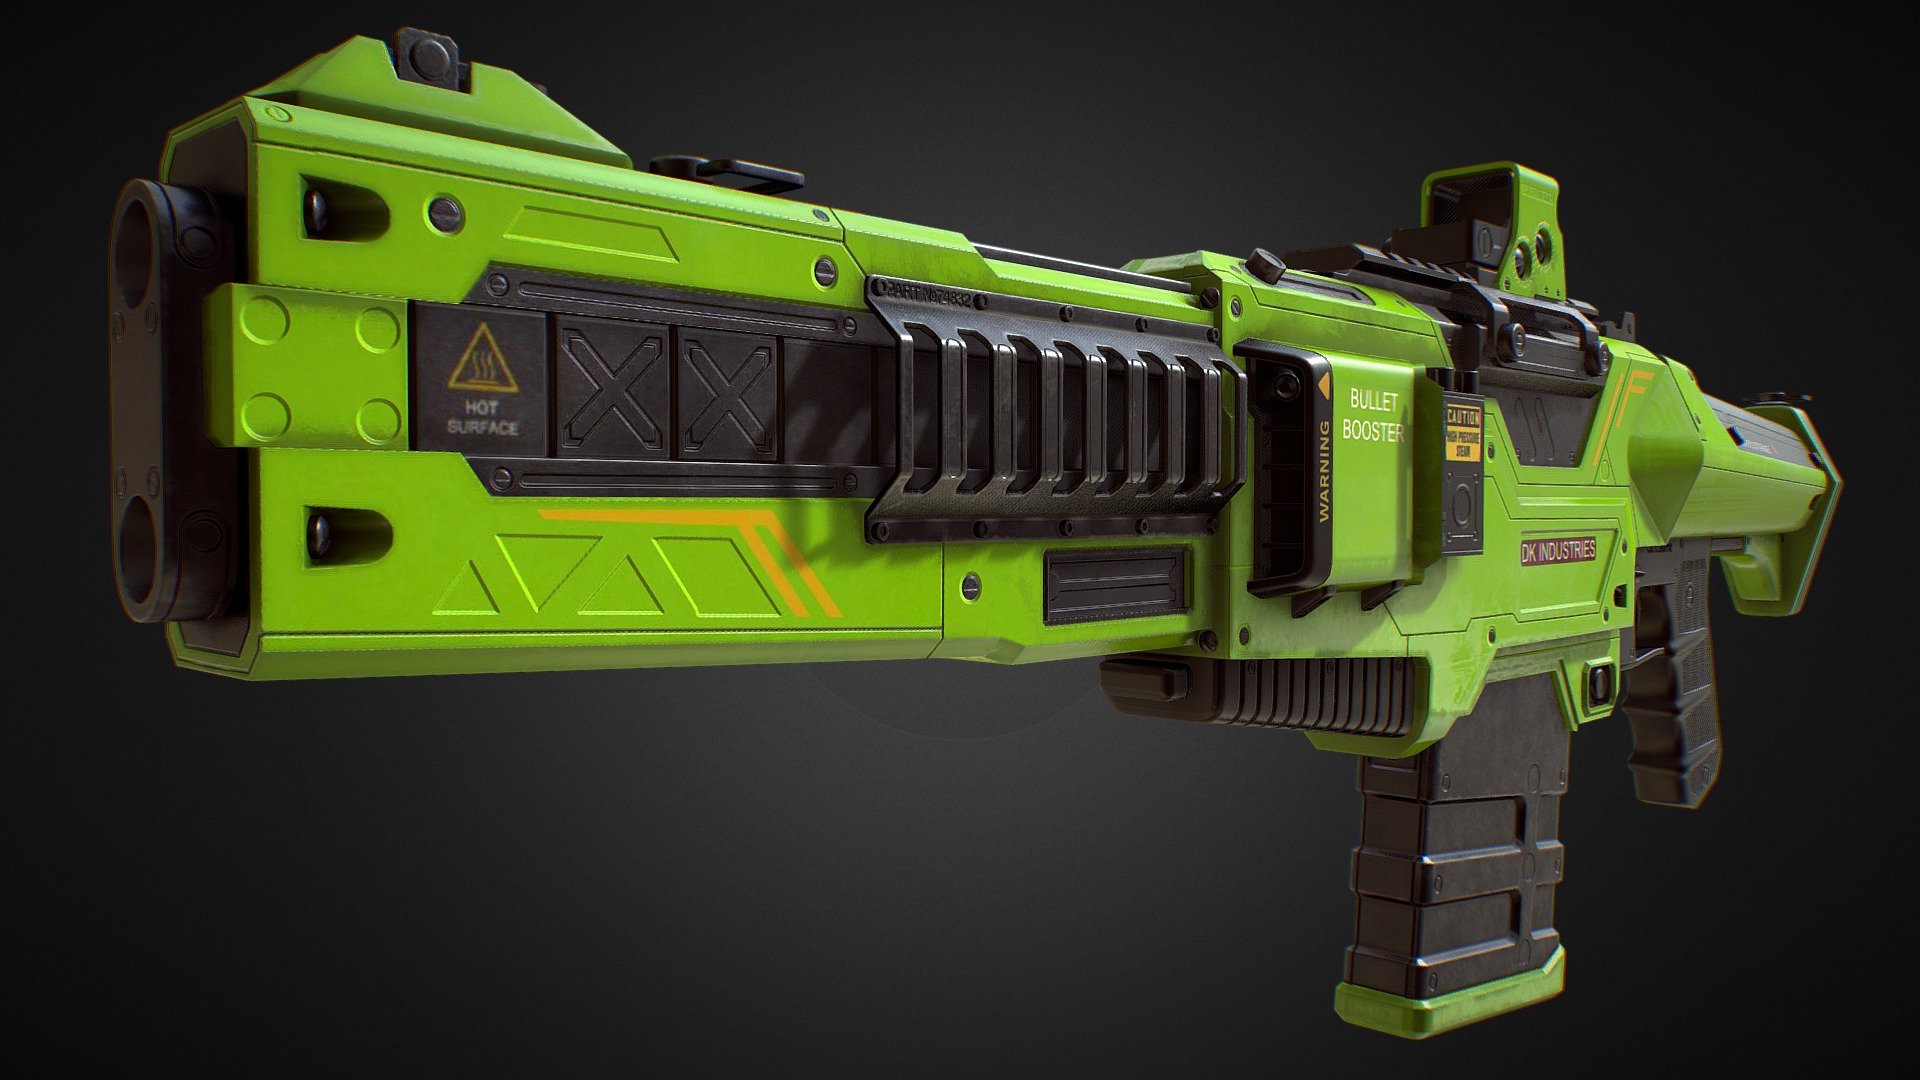 PBR Modular Assault Rifle from Sci-Fi weapon pack 
Unity Assetstore:   PBR SciFi Weapons v2
CG trader:   PBR SciFi Weapons v2
With movable parts and hires textures - PBR Assault Rifle (Green Skin) - 3D model by Dmitrii_Kutsenko (@Dmitrii_Kutcenko) 3d model